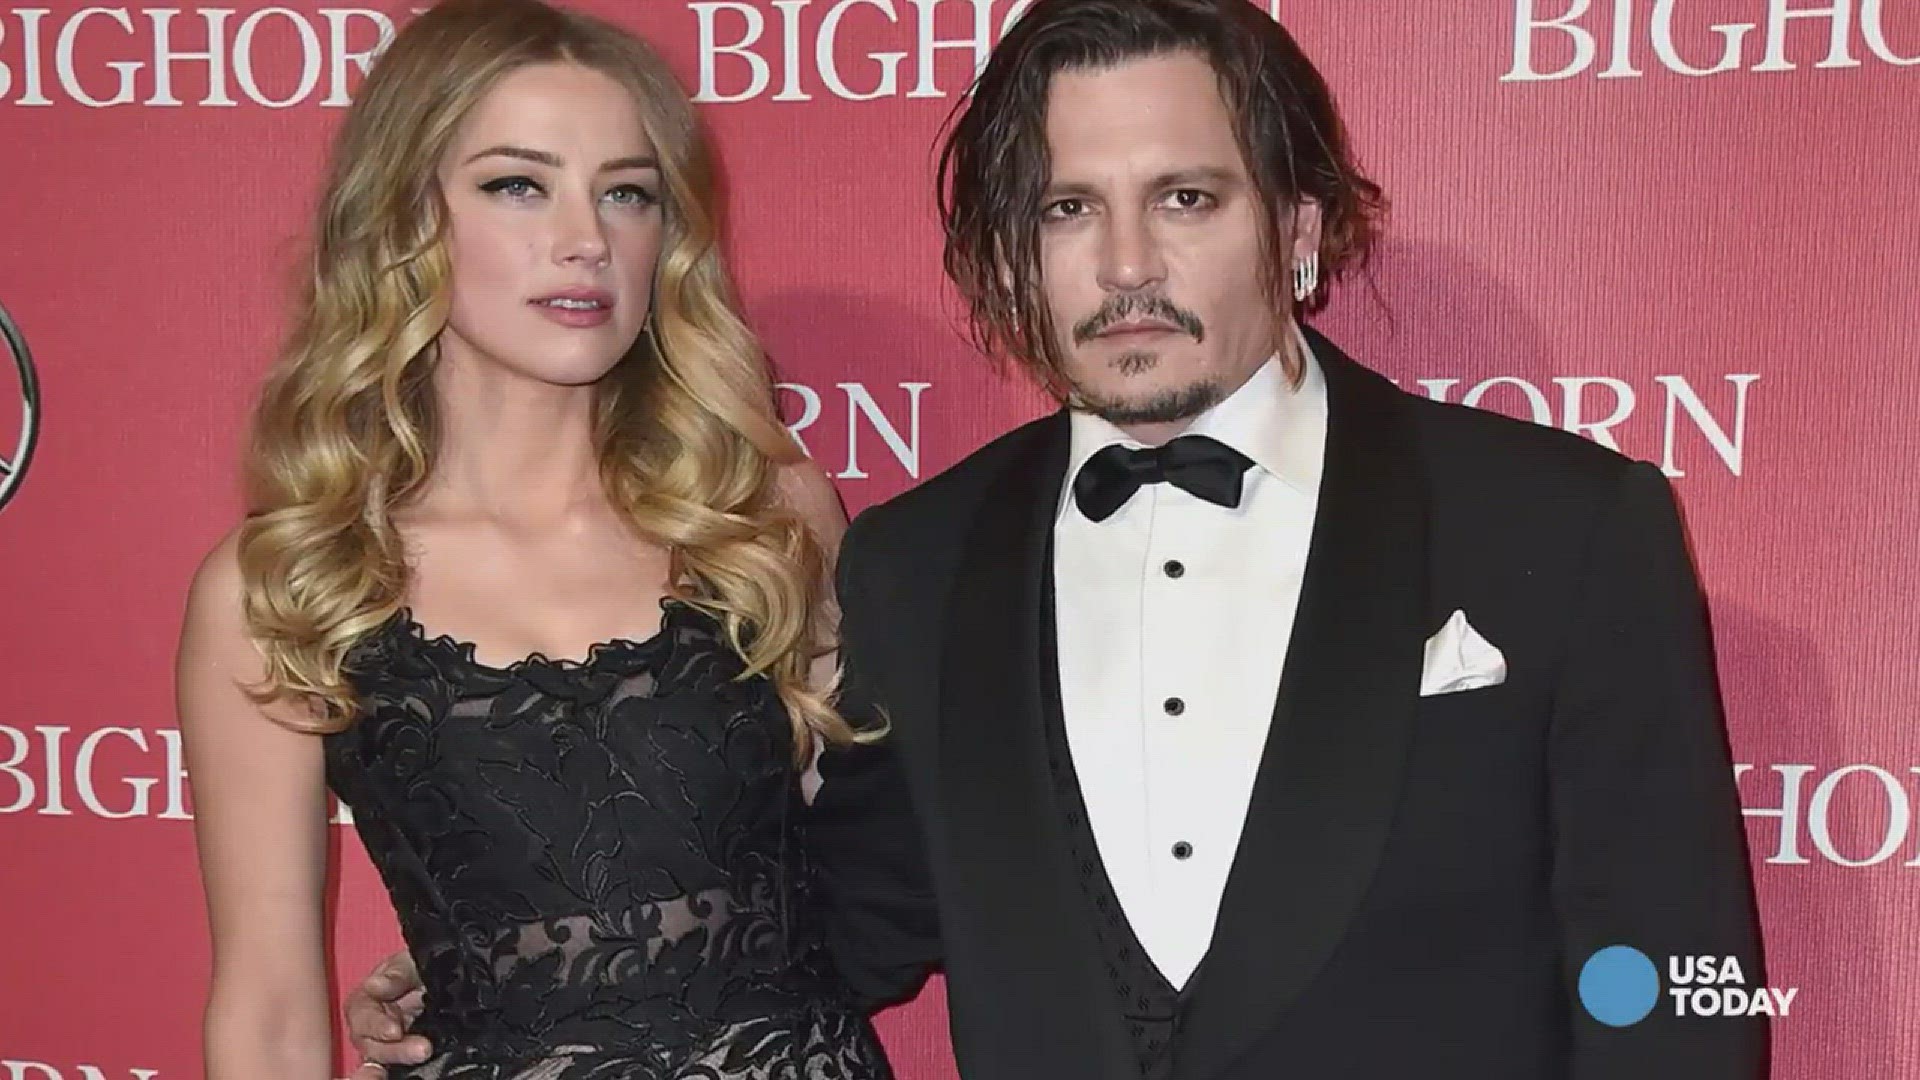 Amber Heard has filed for divorce from Johnny Depp, and is seeking spousal support from the Oscar-nominated actor in court records, according to the Associated Press.